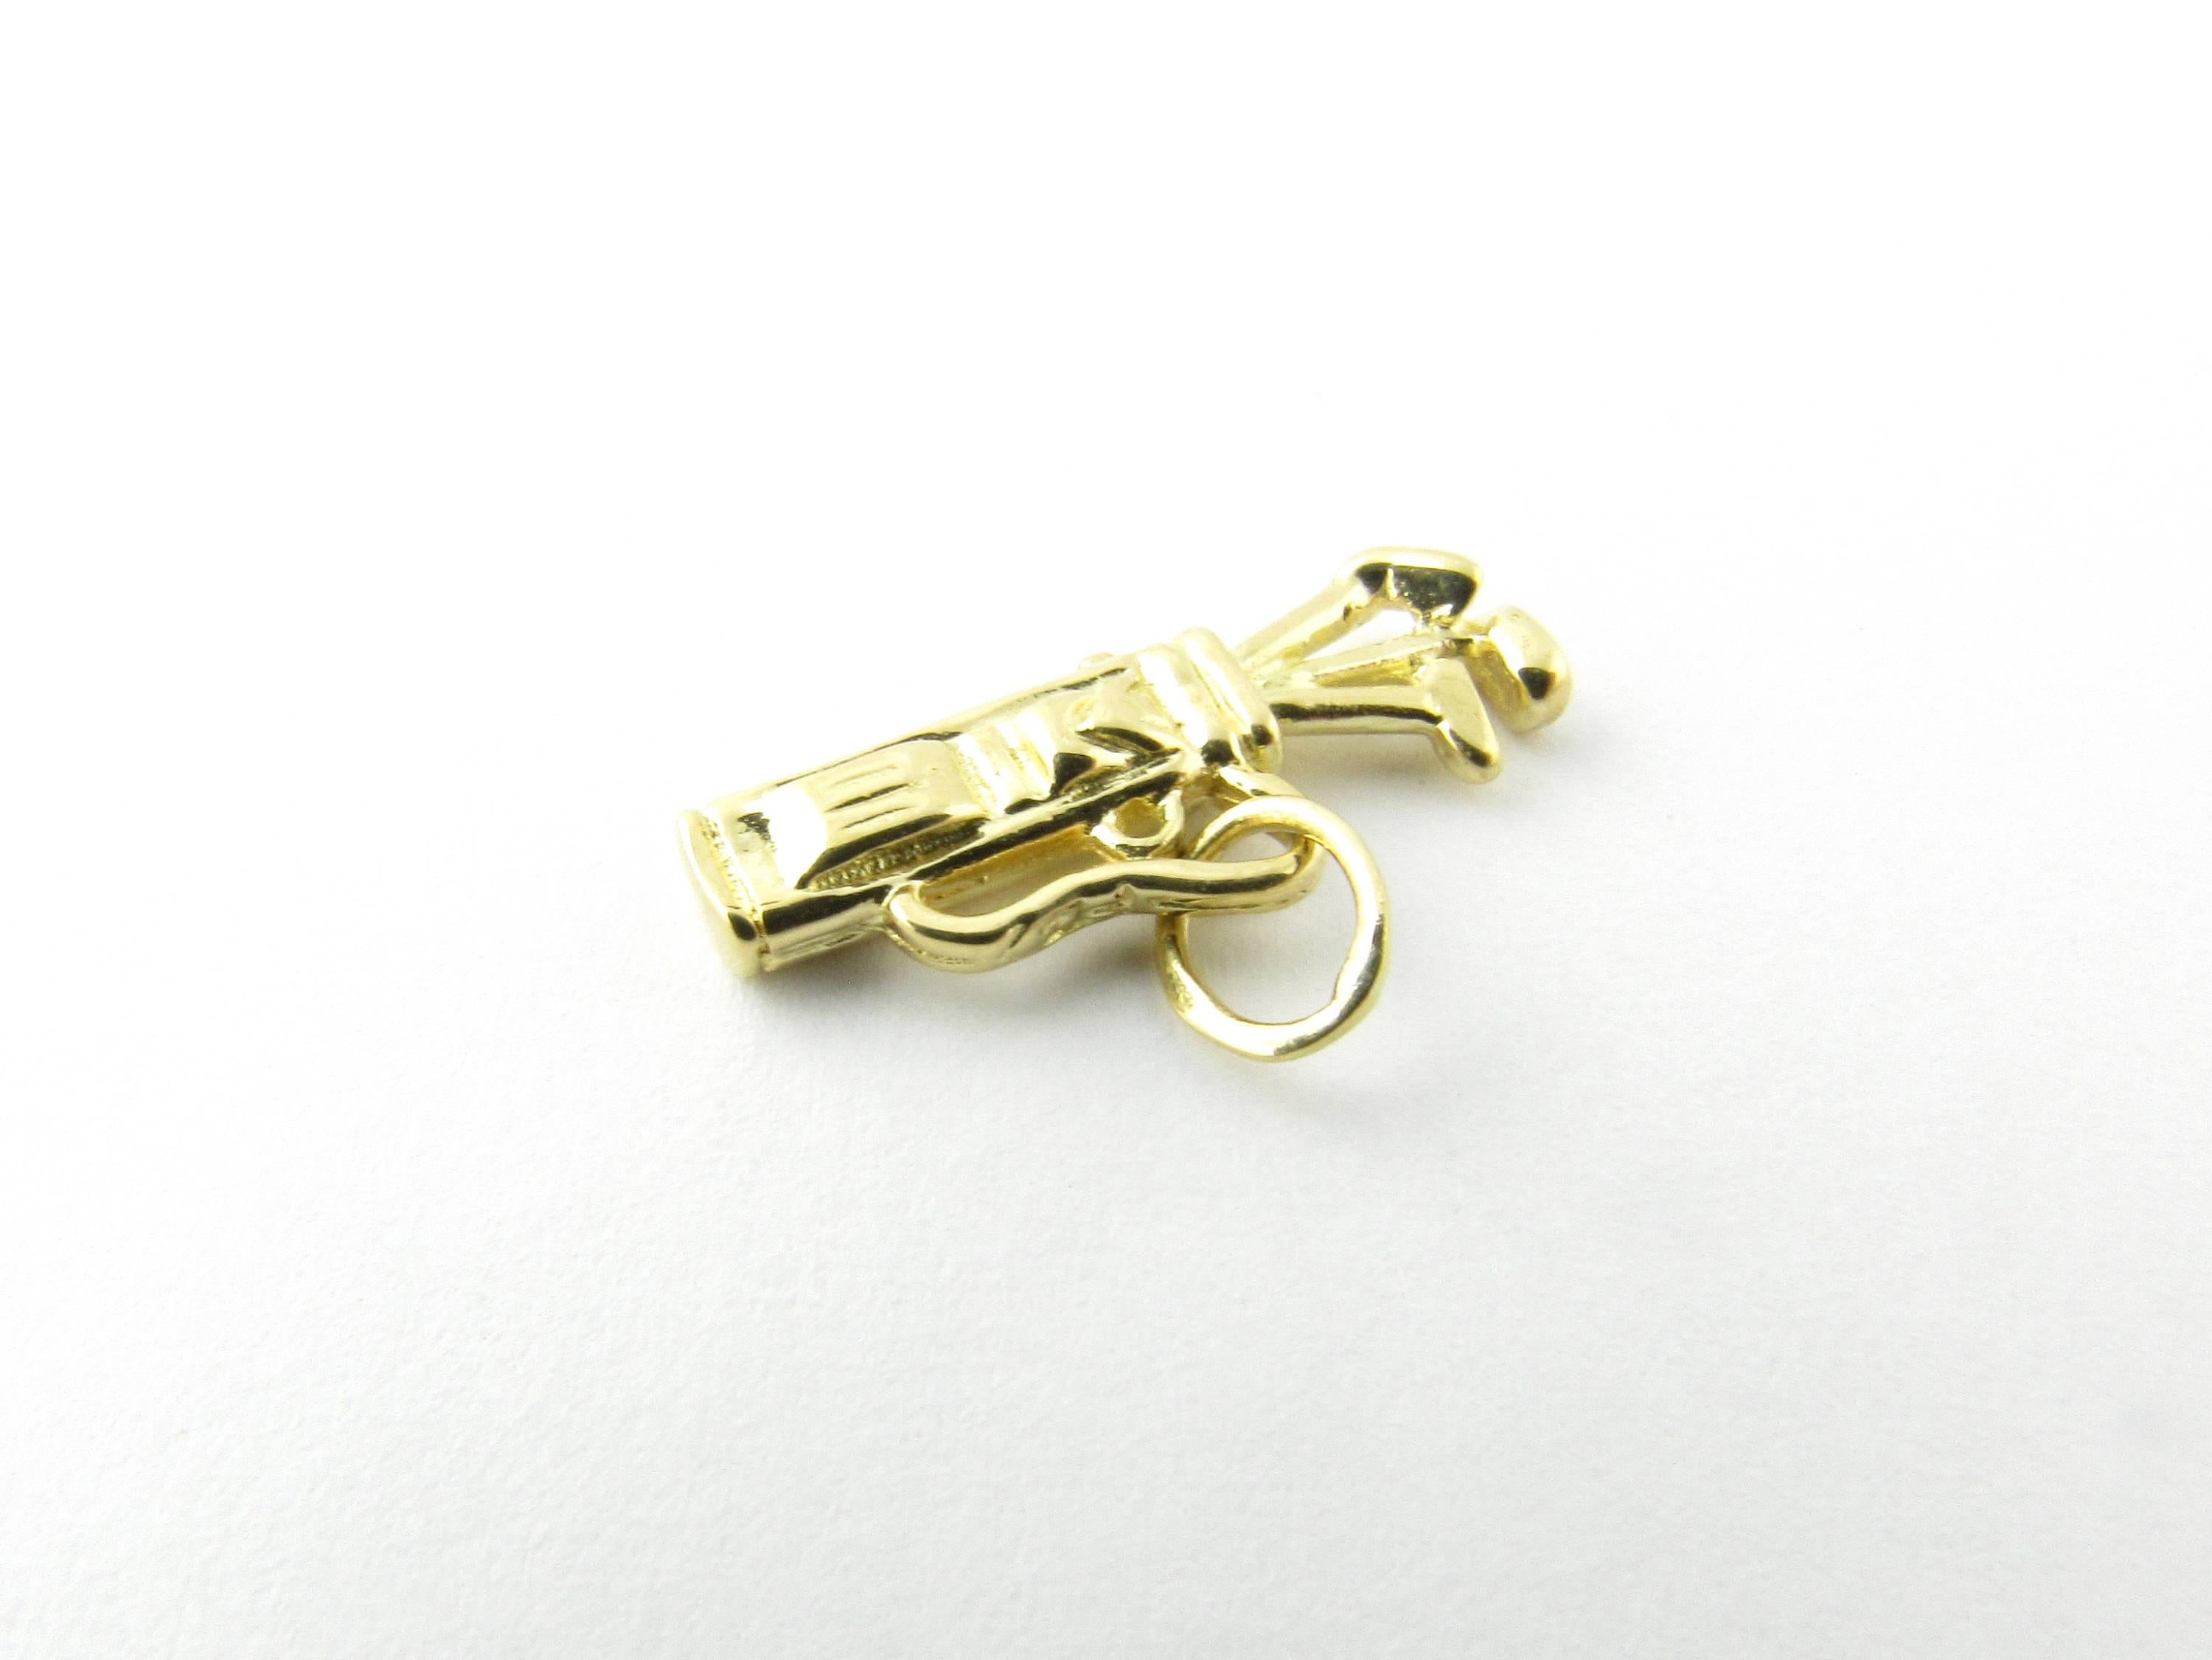 Vintage 18 Karat Yellow Gold Golf Clubs Charm

Perfect gift for the golfer in your life!

This lovely charm features a set of golf clubs in bag beautifully detailed in 18K yellow gold.

Size: 18 mm x 7 mm (actual charm)

Weight: 1.0 dwt. / 1.6